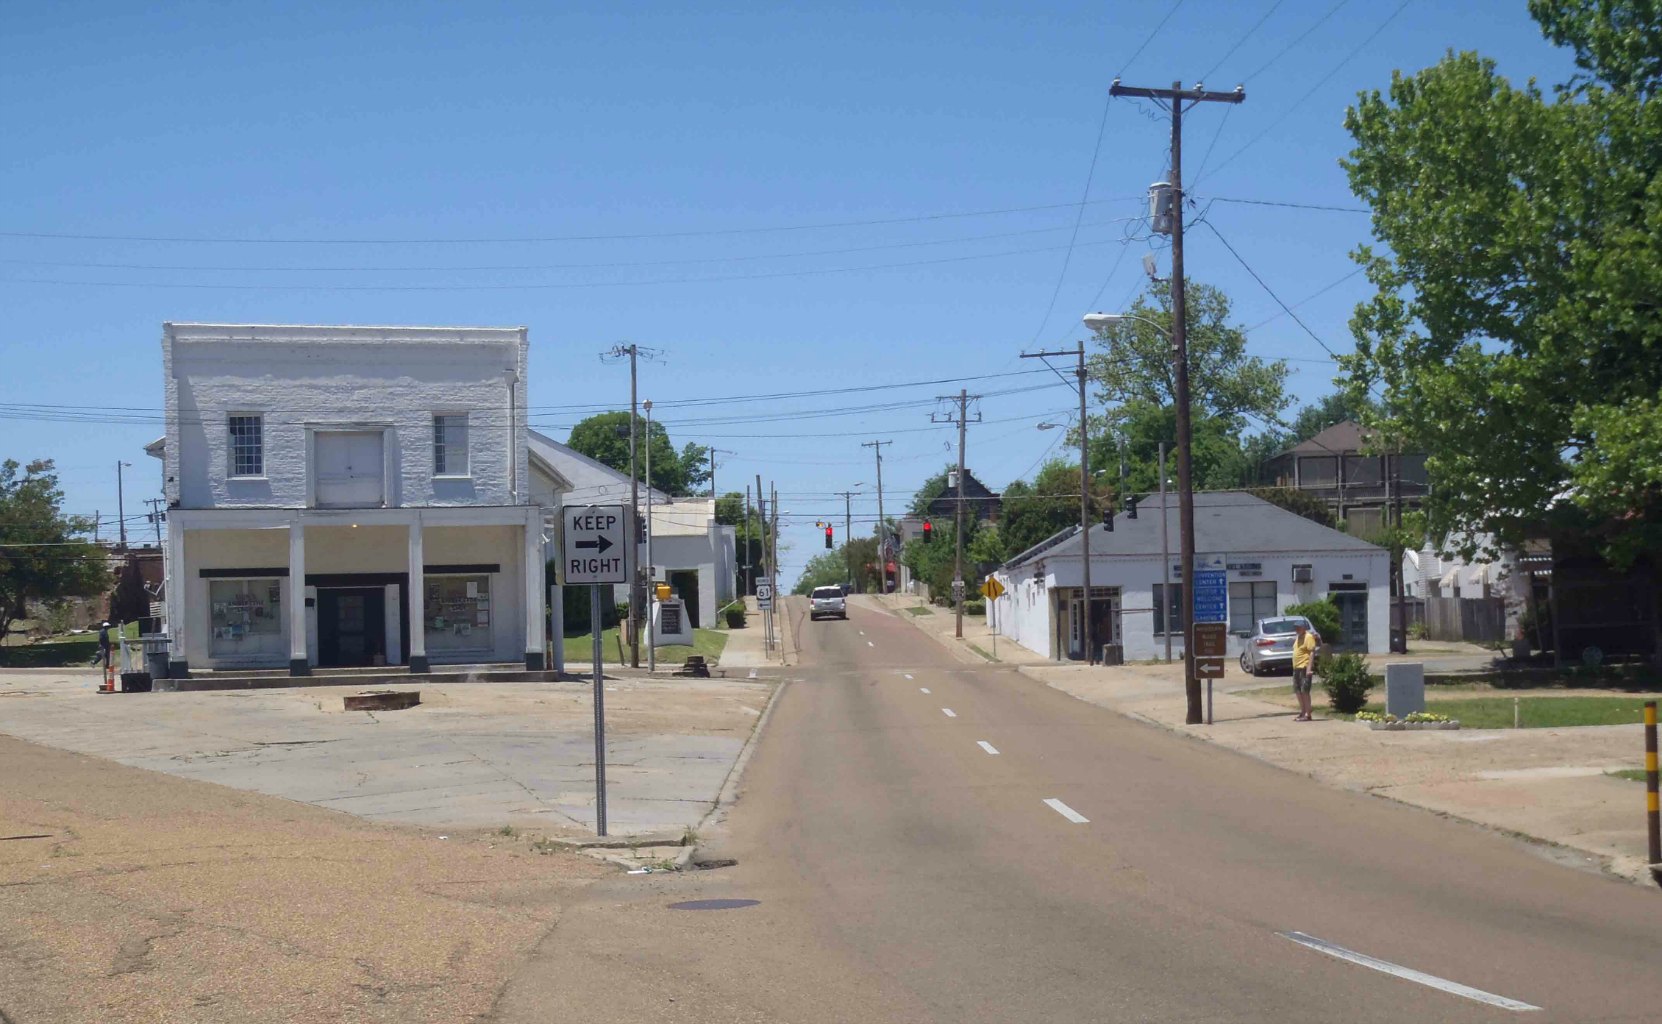 Street view at the site of the Rhythm Night Club Fire, Natchez, Mississippi